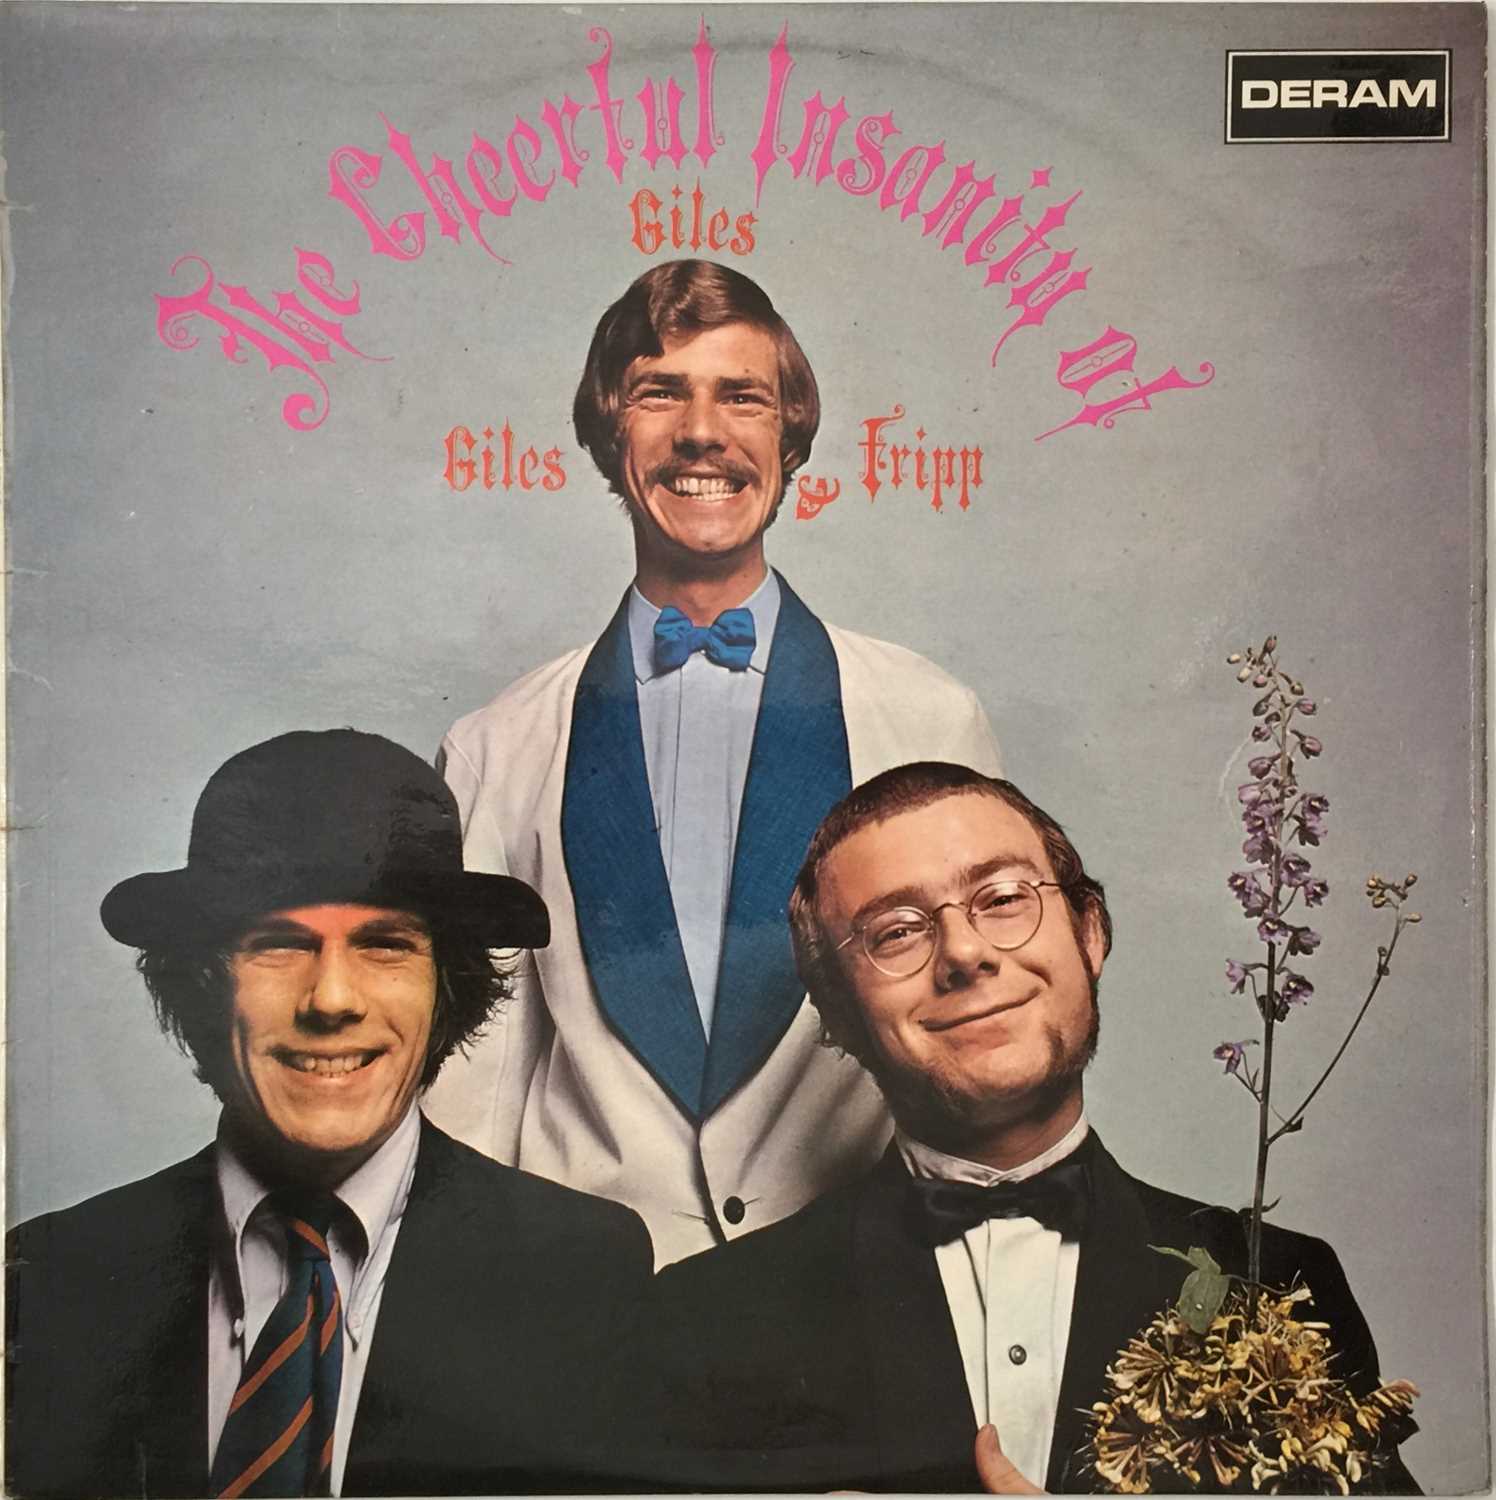 GILES, GILES AND FRIPP - THE CHEERFUL INSANITY OF LP (UK STEREO - DERAM - SML 1022) - Image 2 of 5